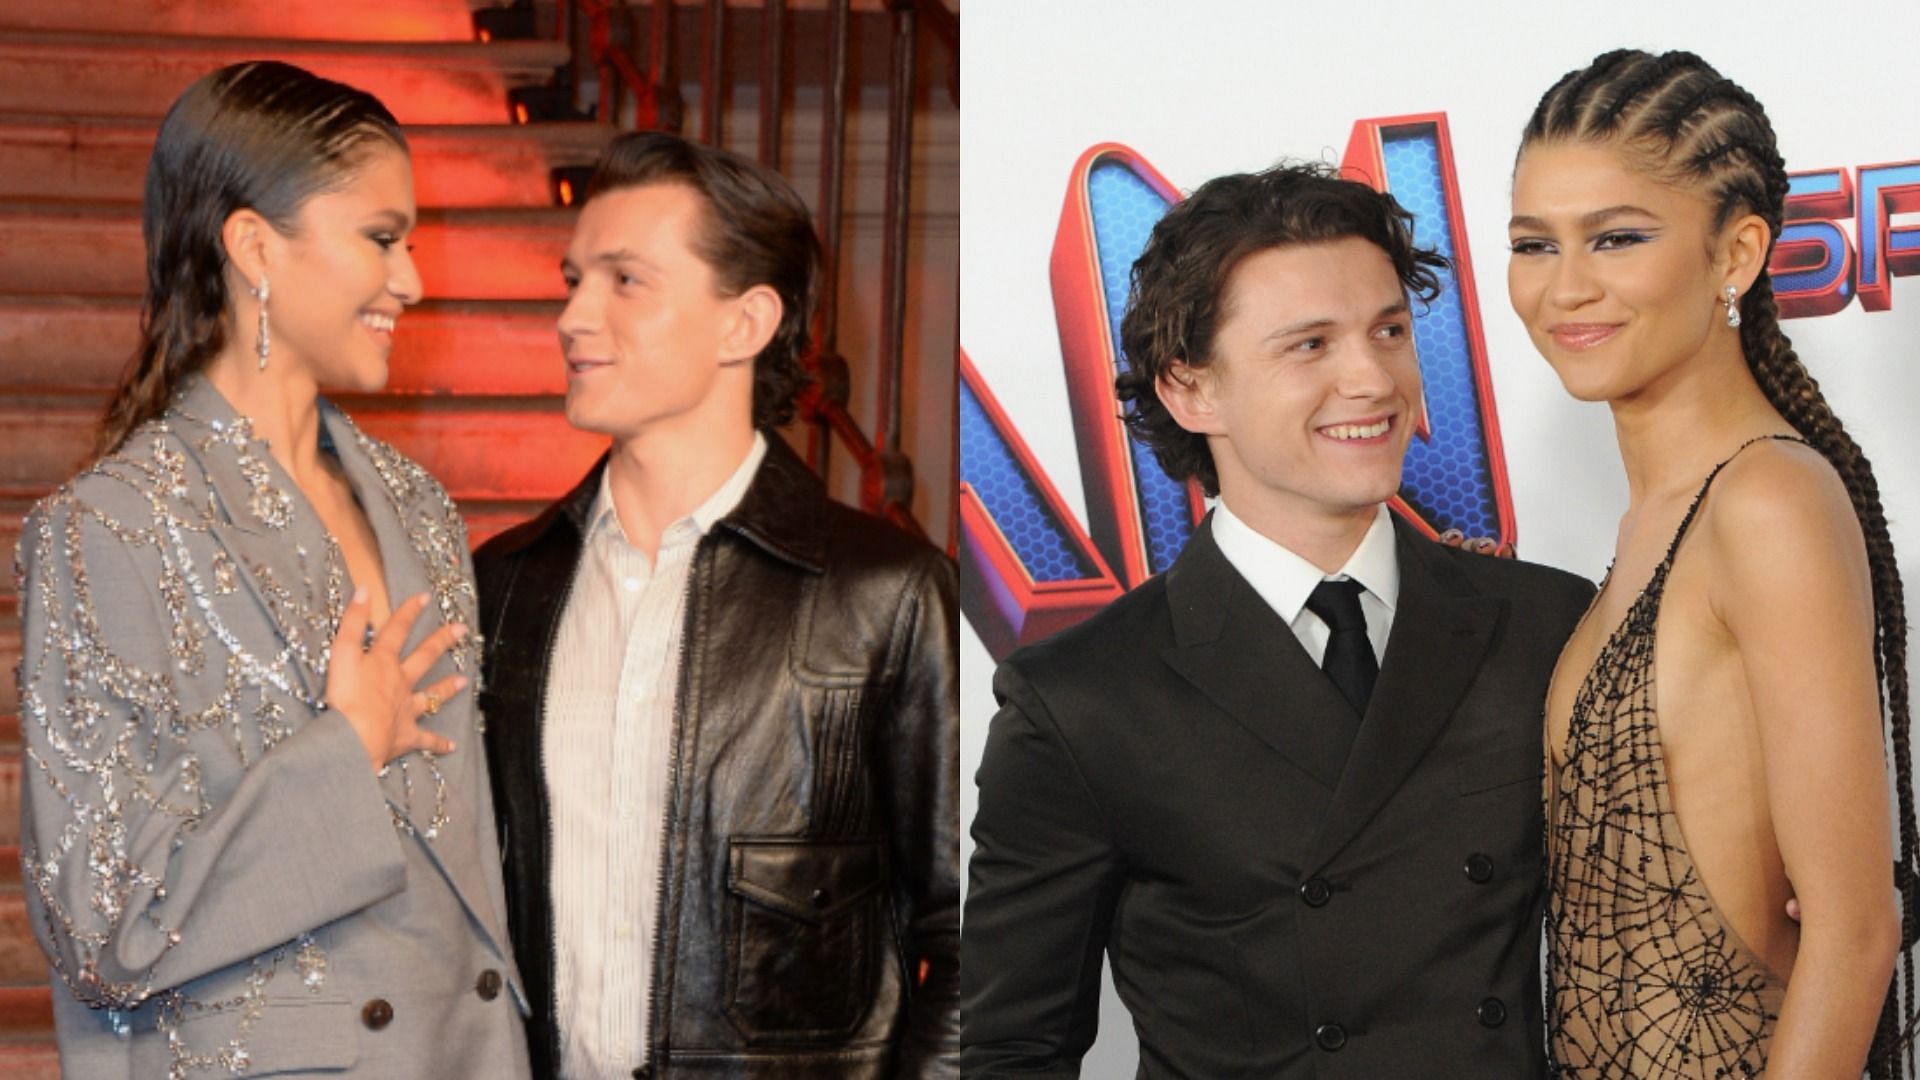 Tom Holland and Zendaya have a new mansion in London (Images via WireImage and Getty)